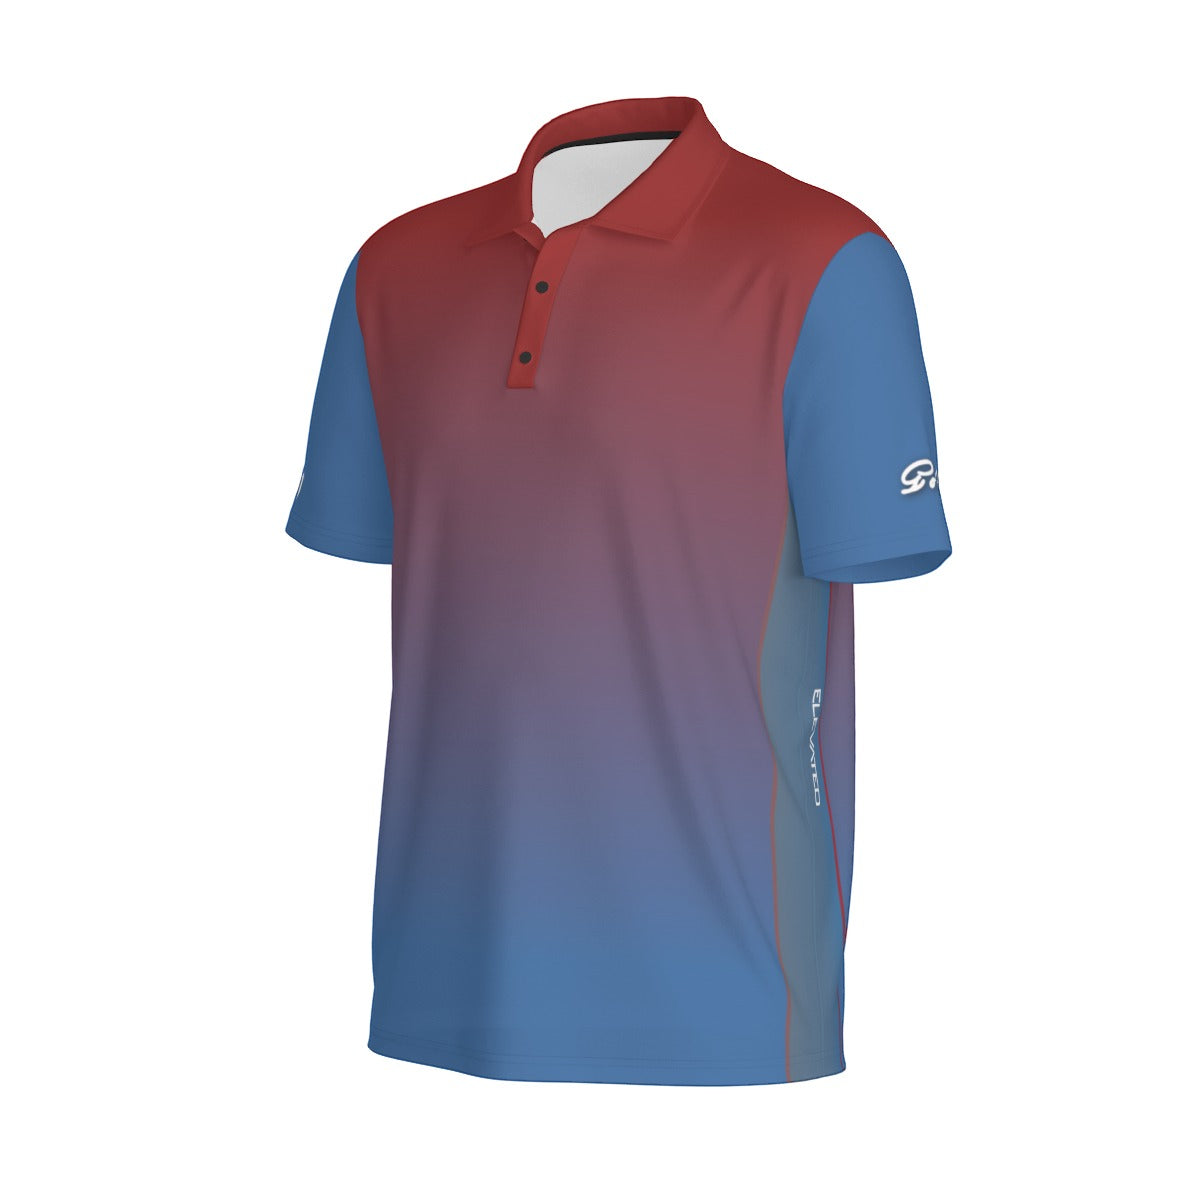 Elevated stretchy spandex polyester wicking polo